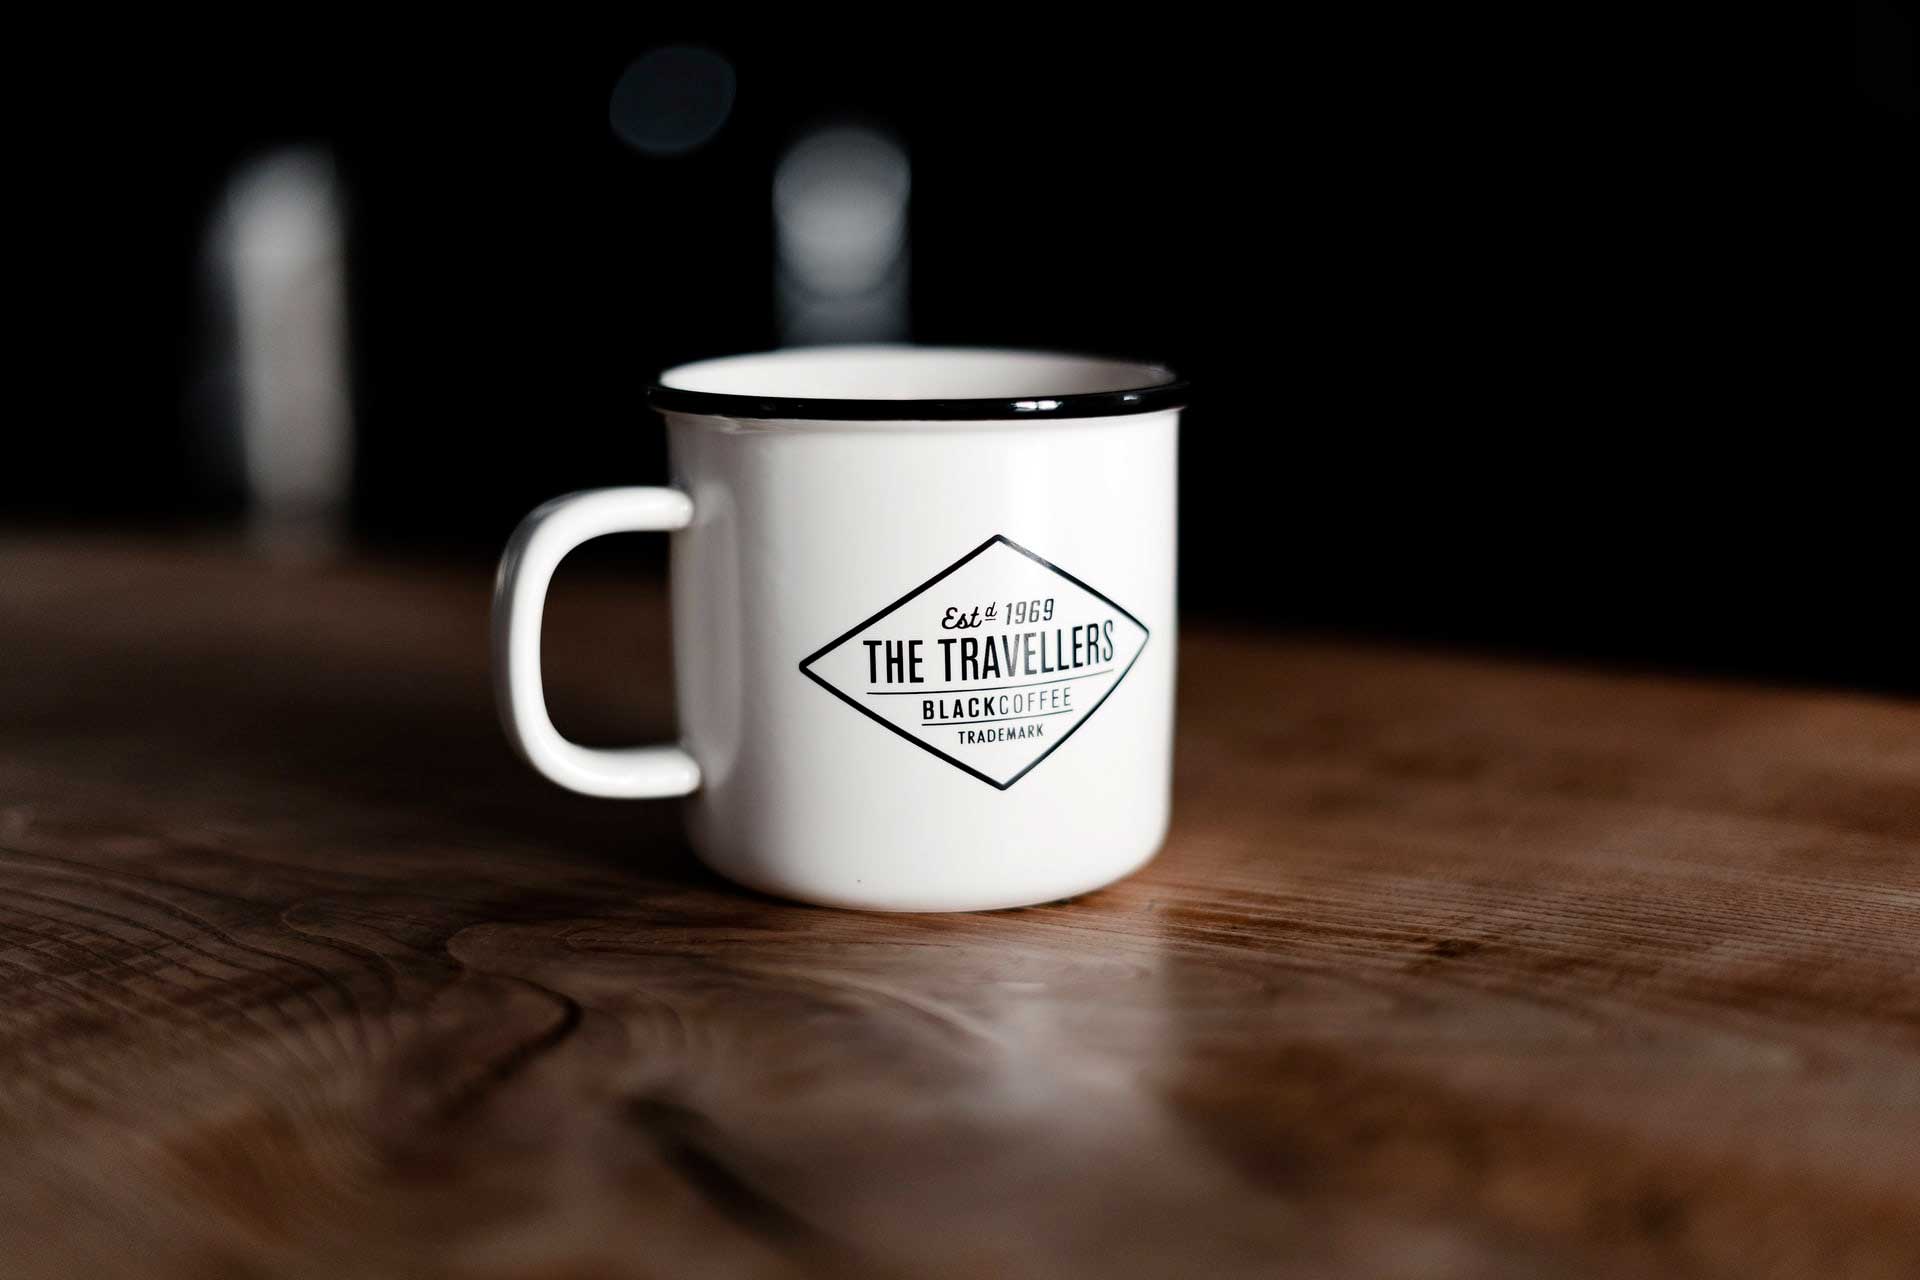 This is our portfolio of personalized mugs